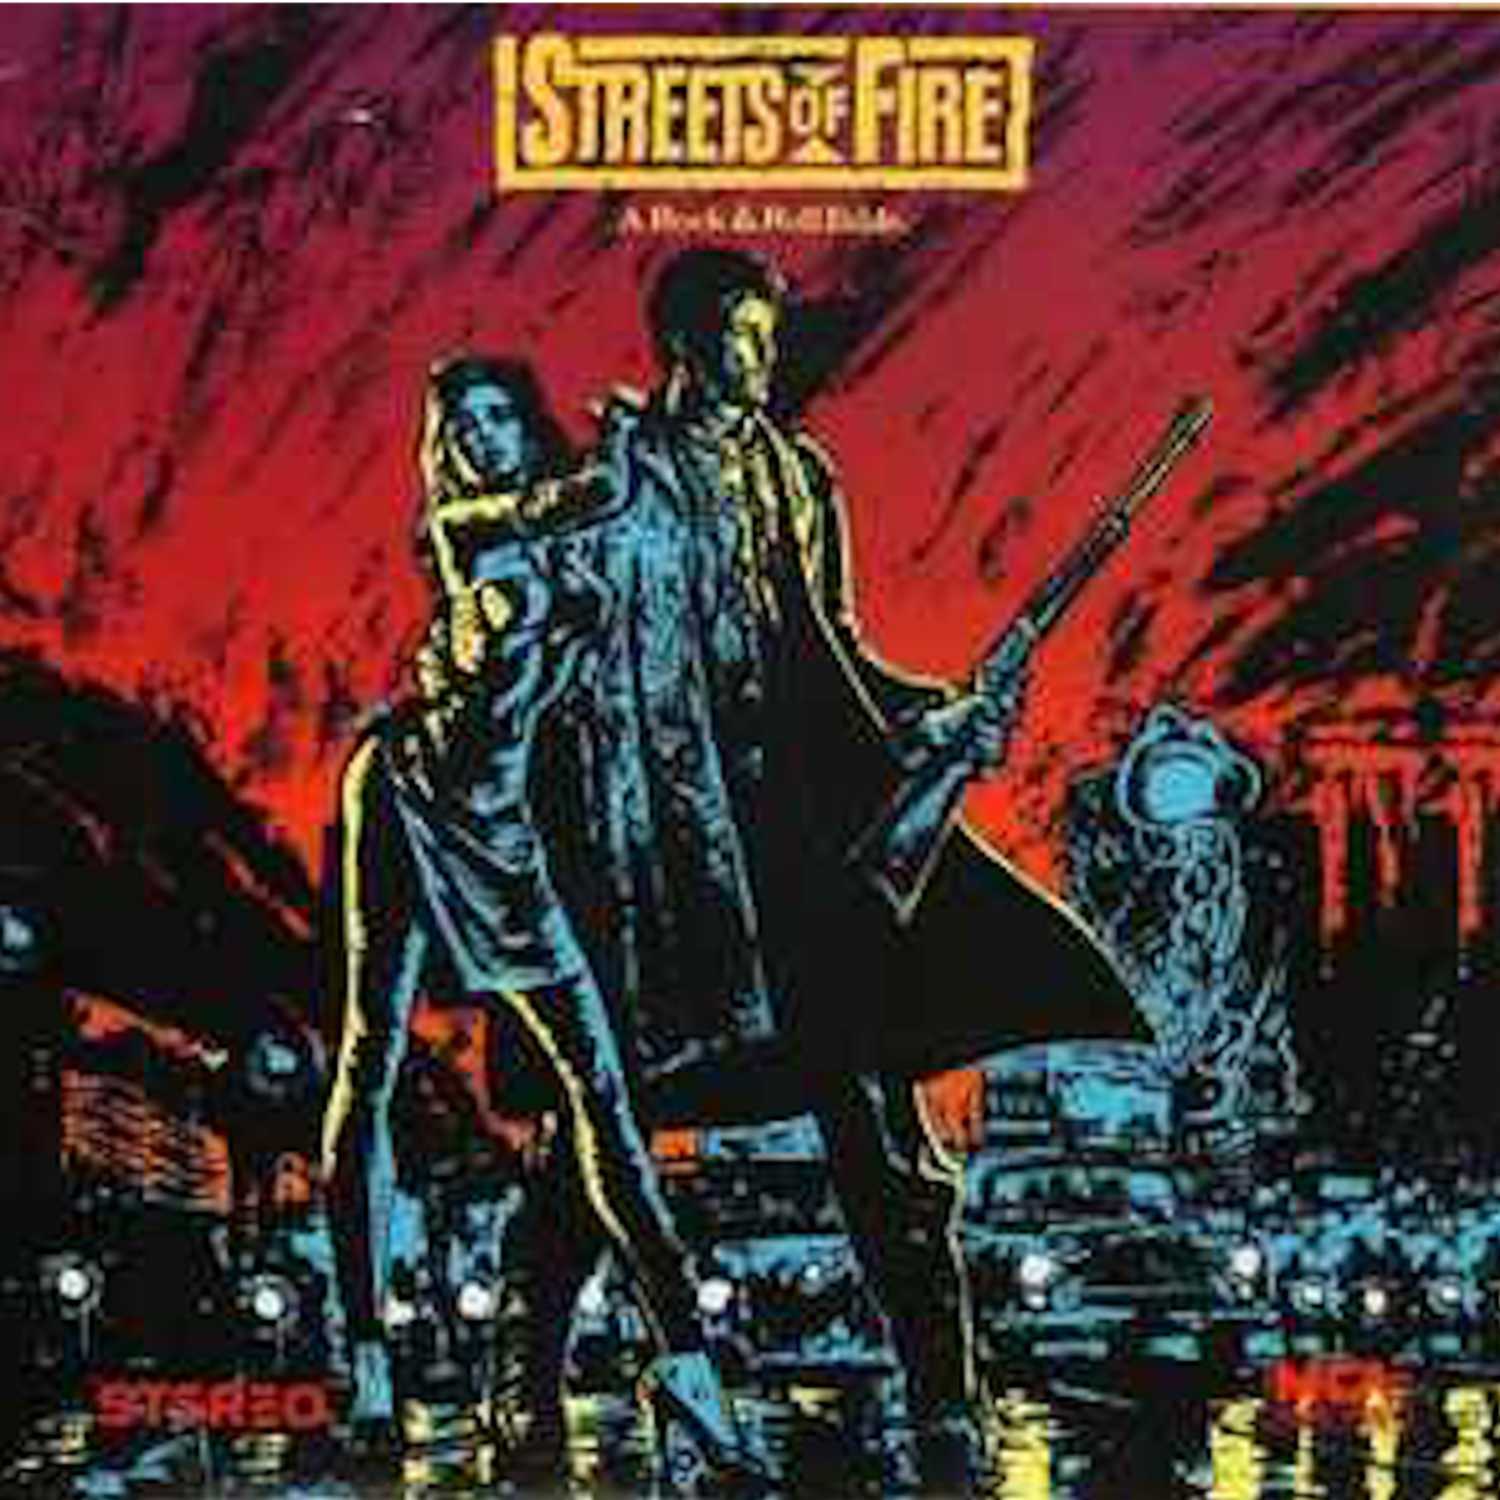 Spine #43 - Streets of Fire